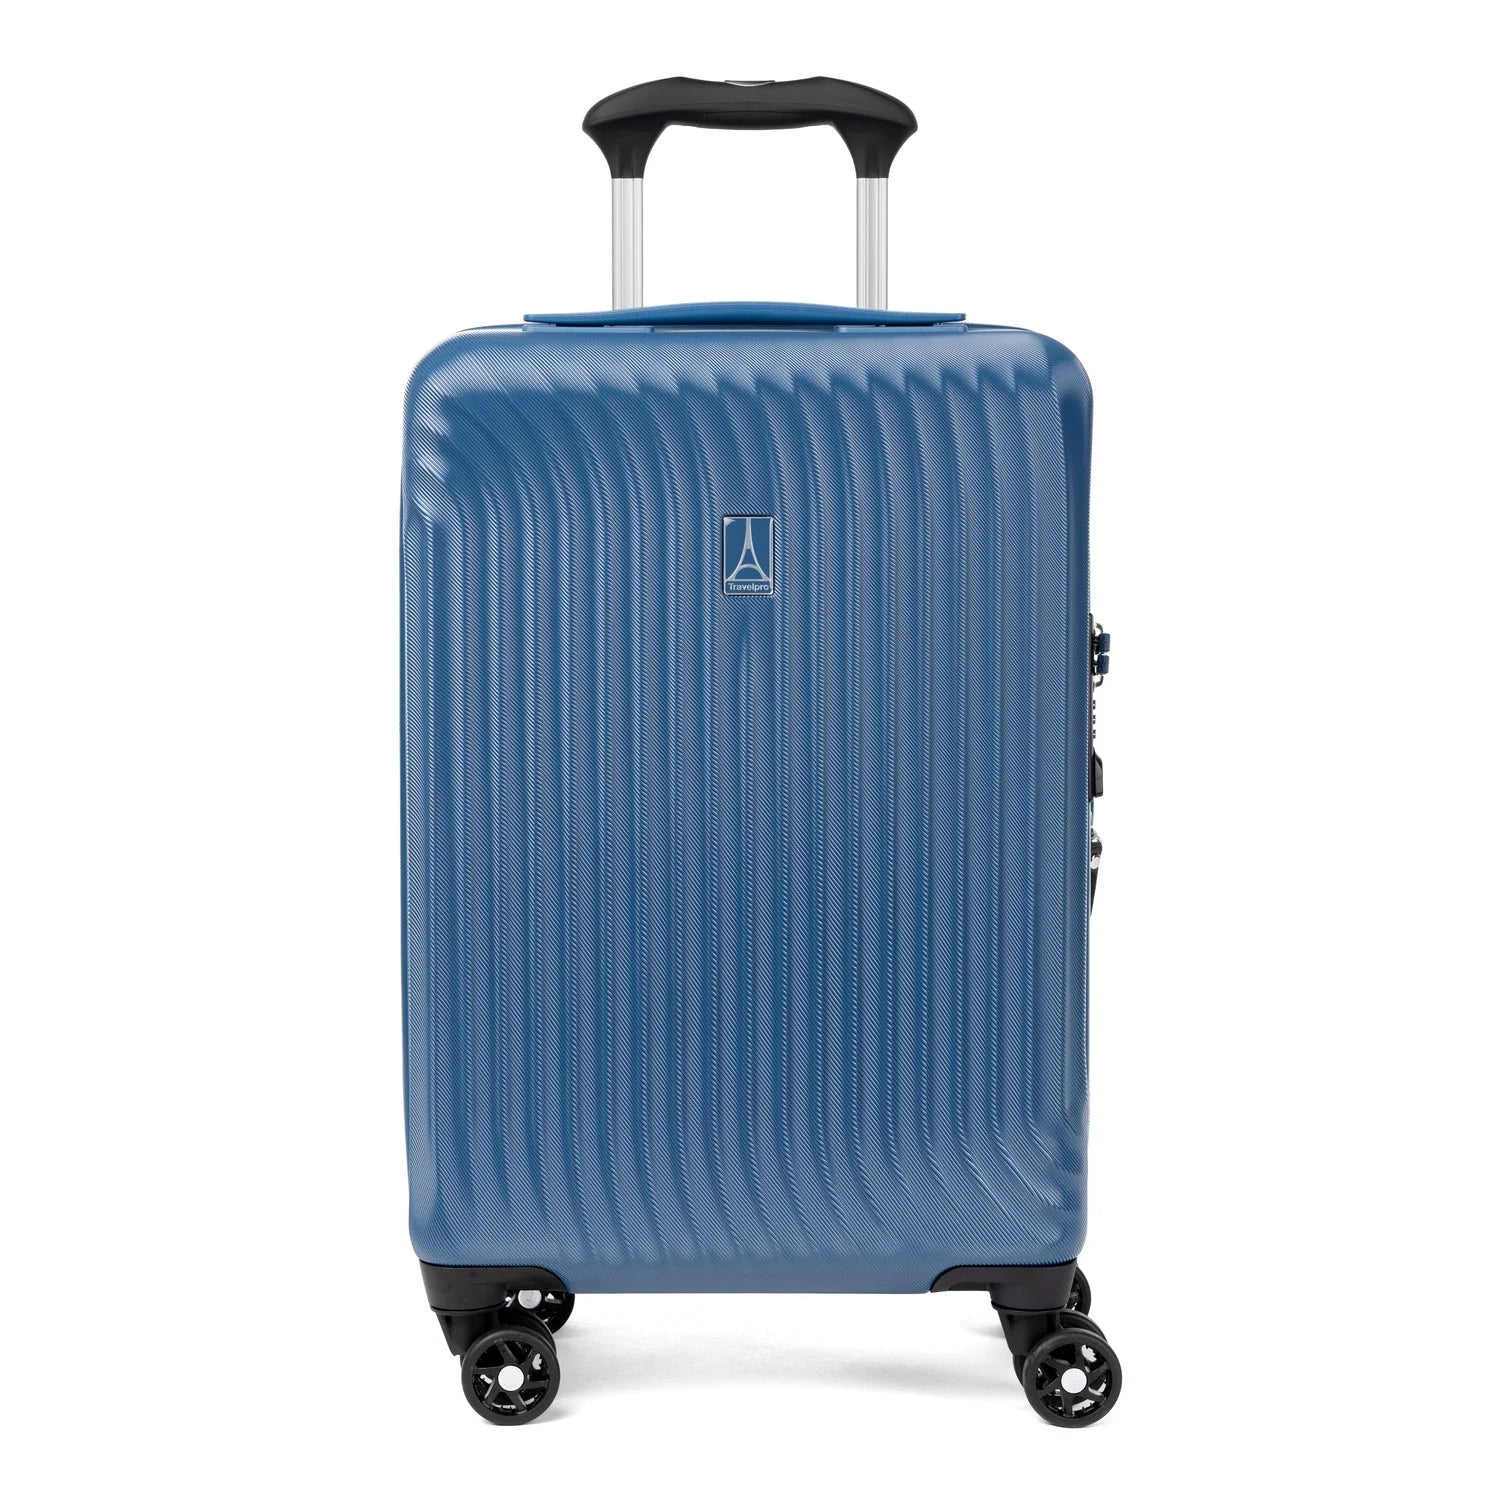 Travelpro Maxlite Air Compact Carry-On Expandable Hardside Spinner Luggage - Ensign Blue